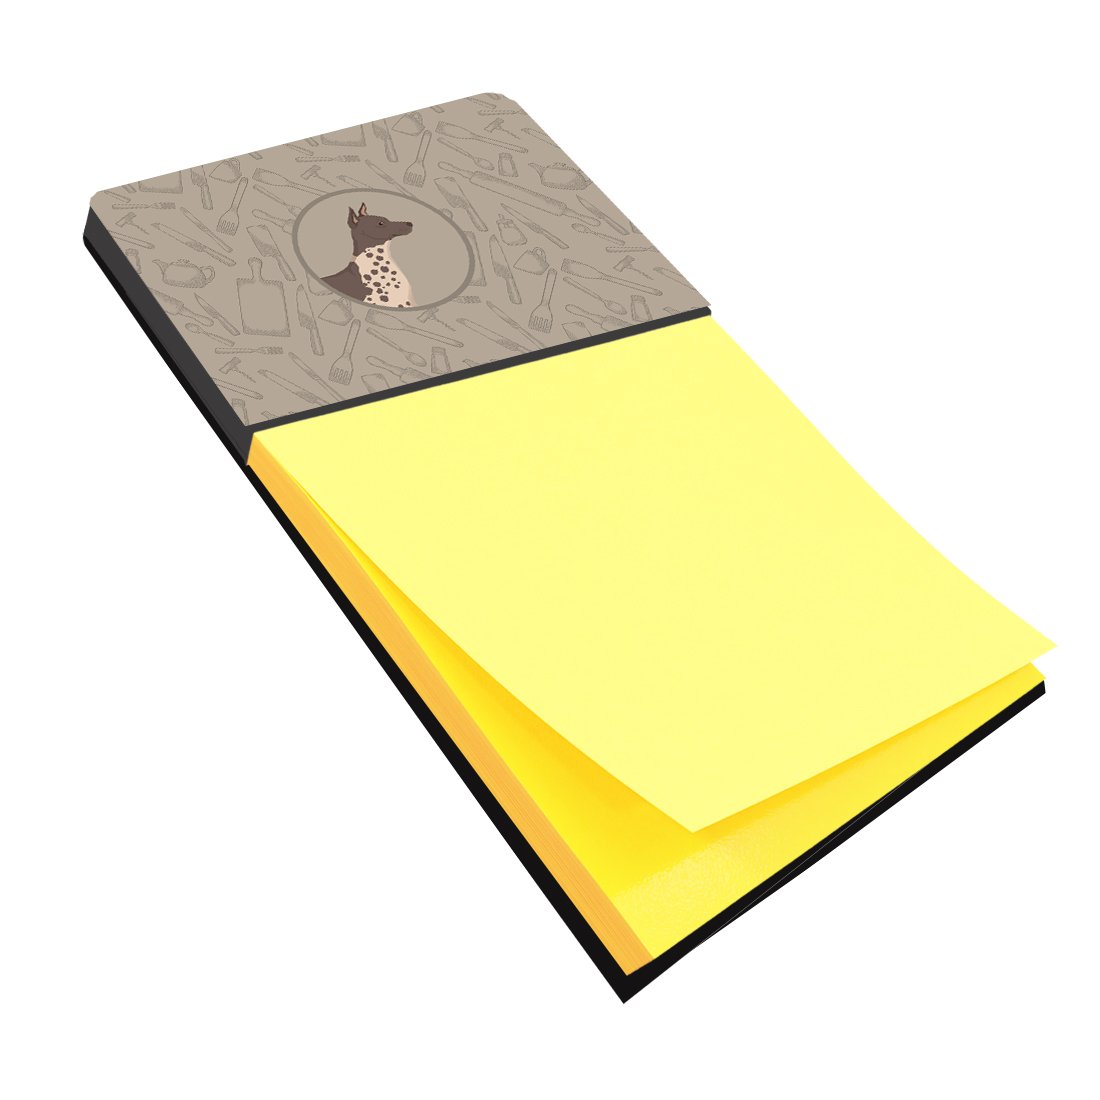 American Hairless Terrier In the Kitchen Sticky Note Holder CK2161SN by Caroline's Treasures